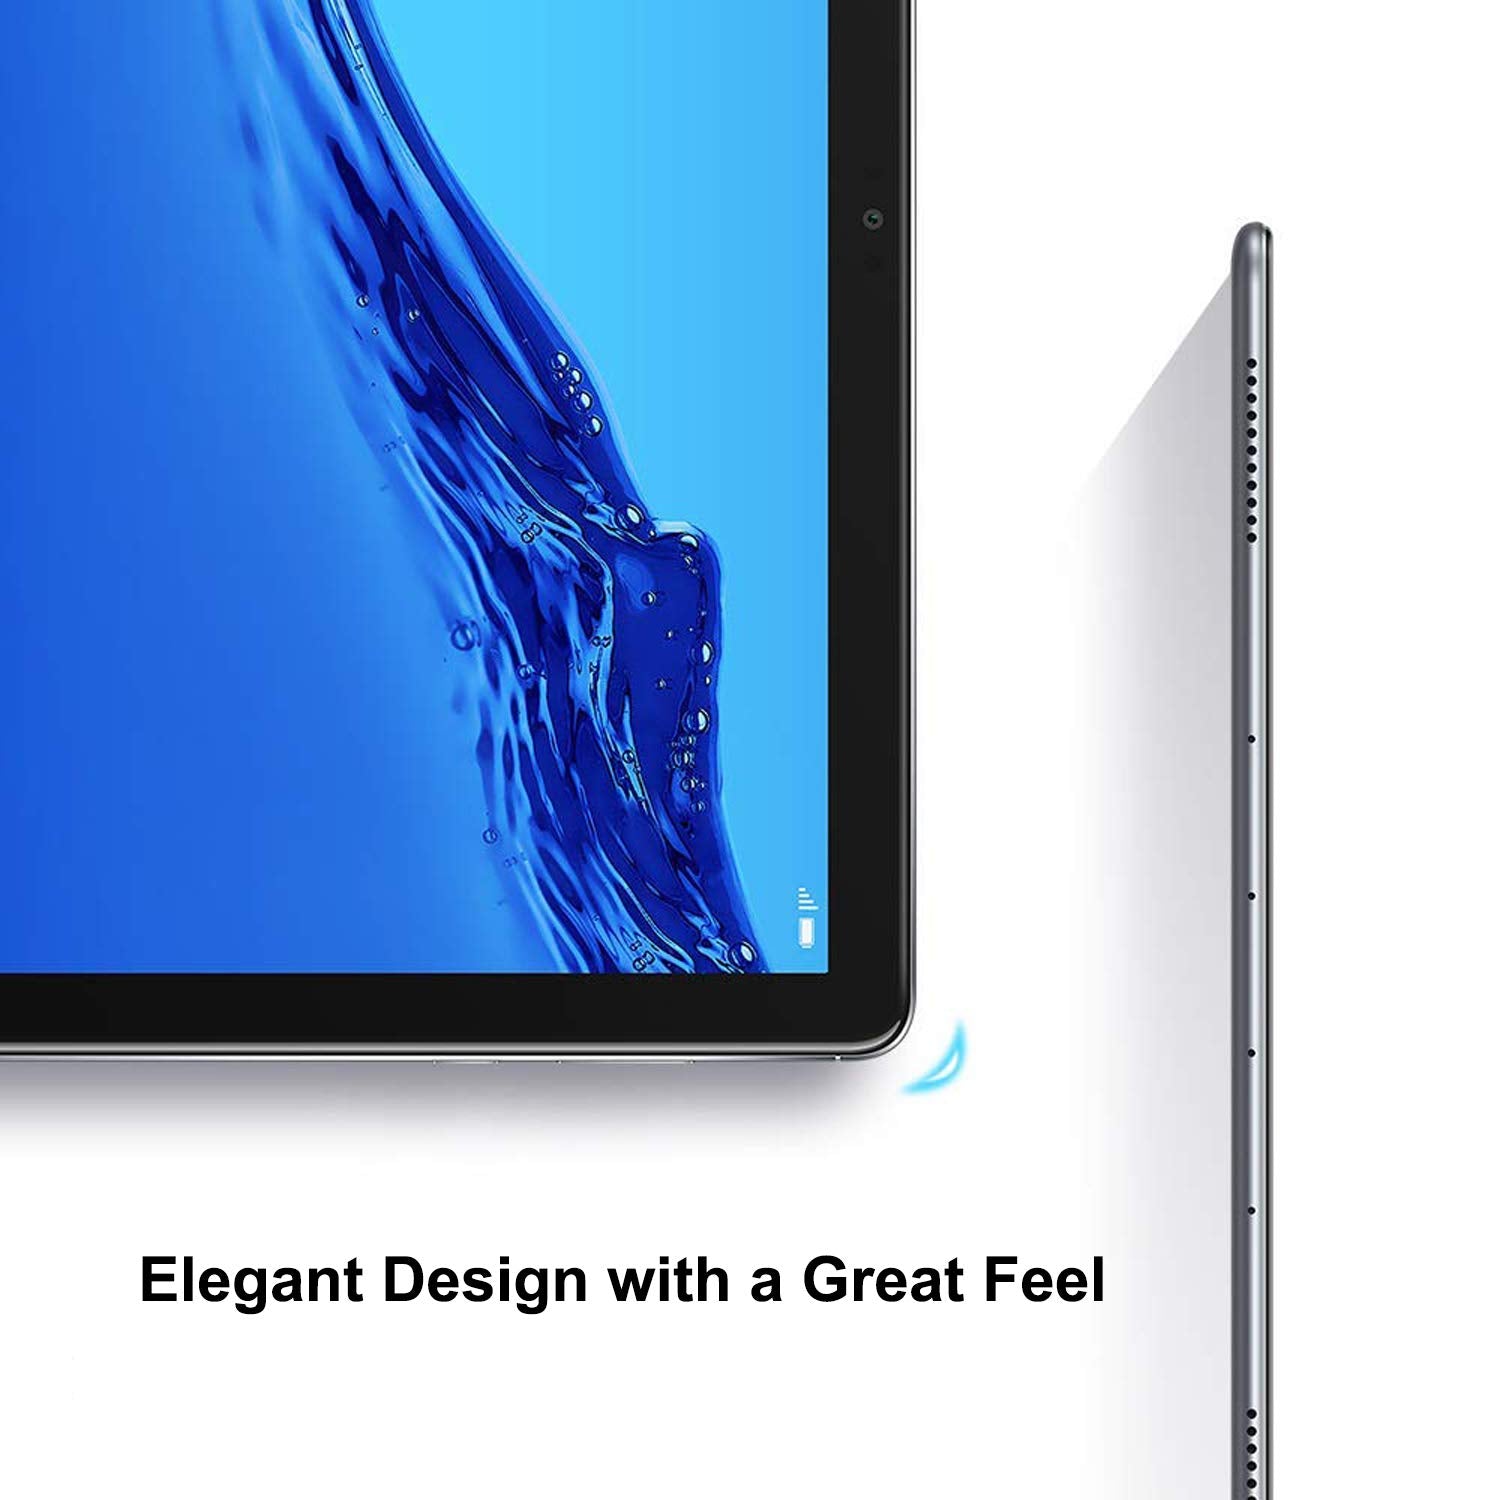 Huawei MediaPad M5 Lite Android Tablet with 10.1" FHD Display